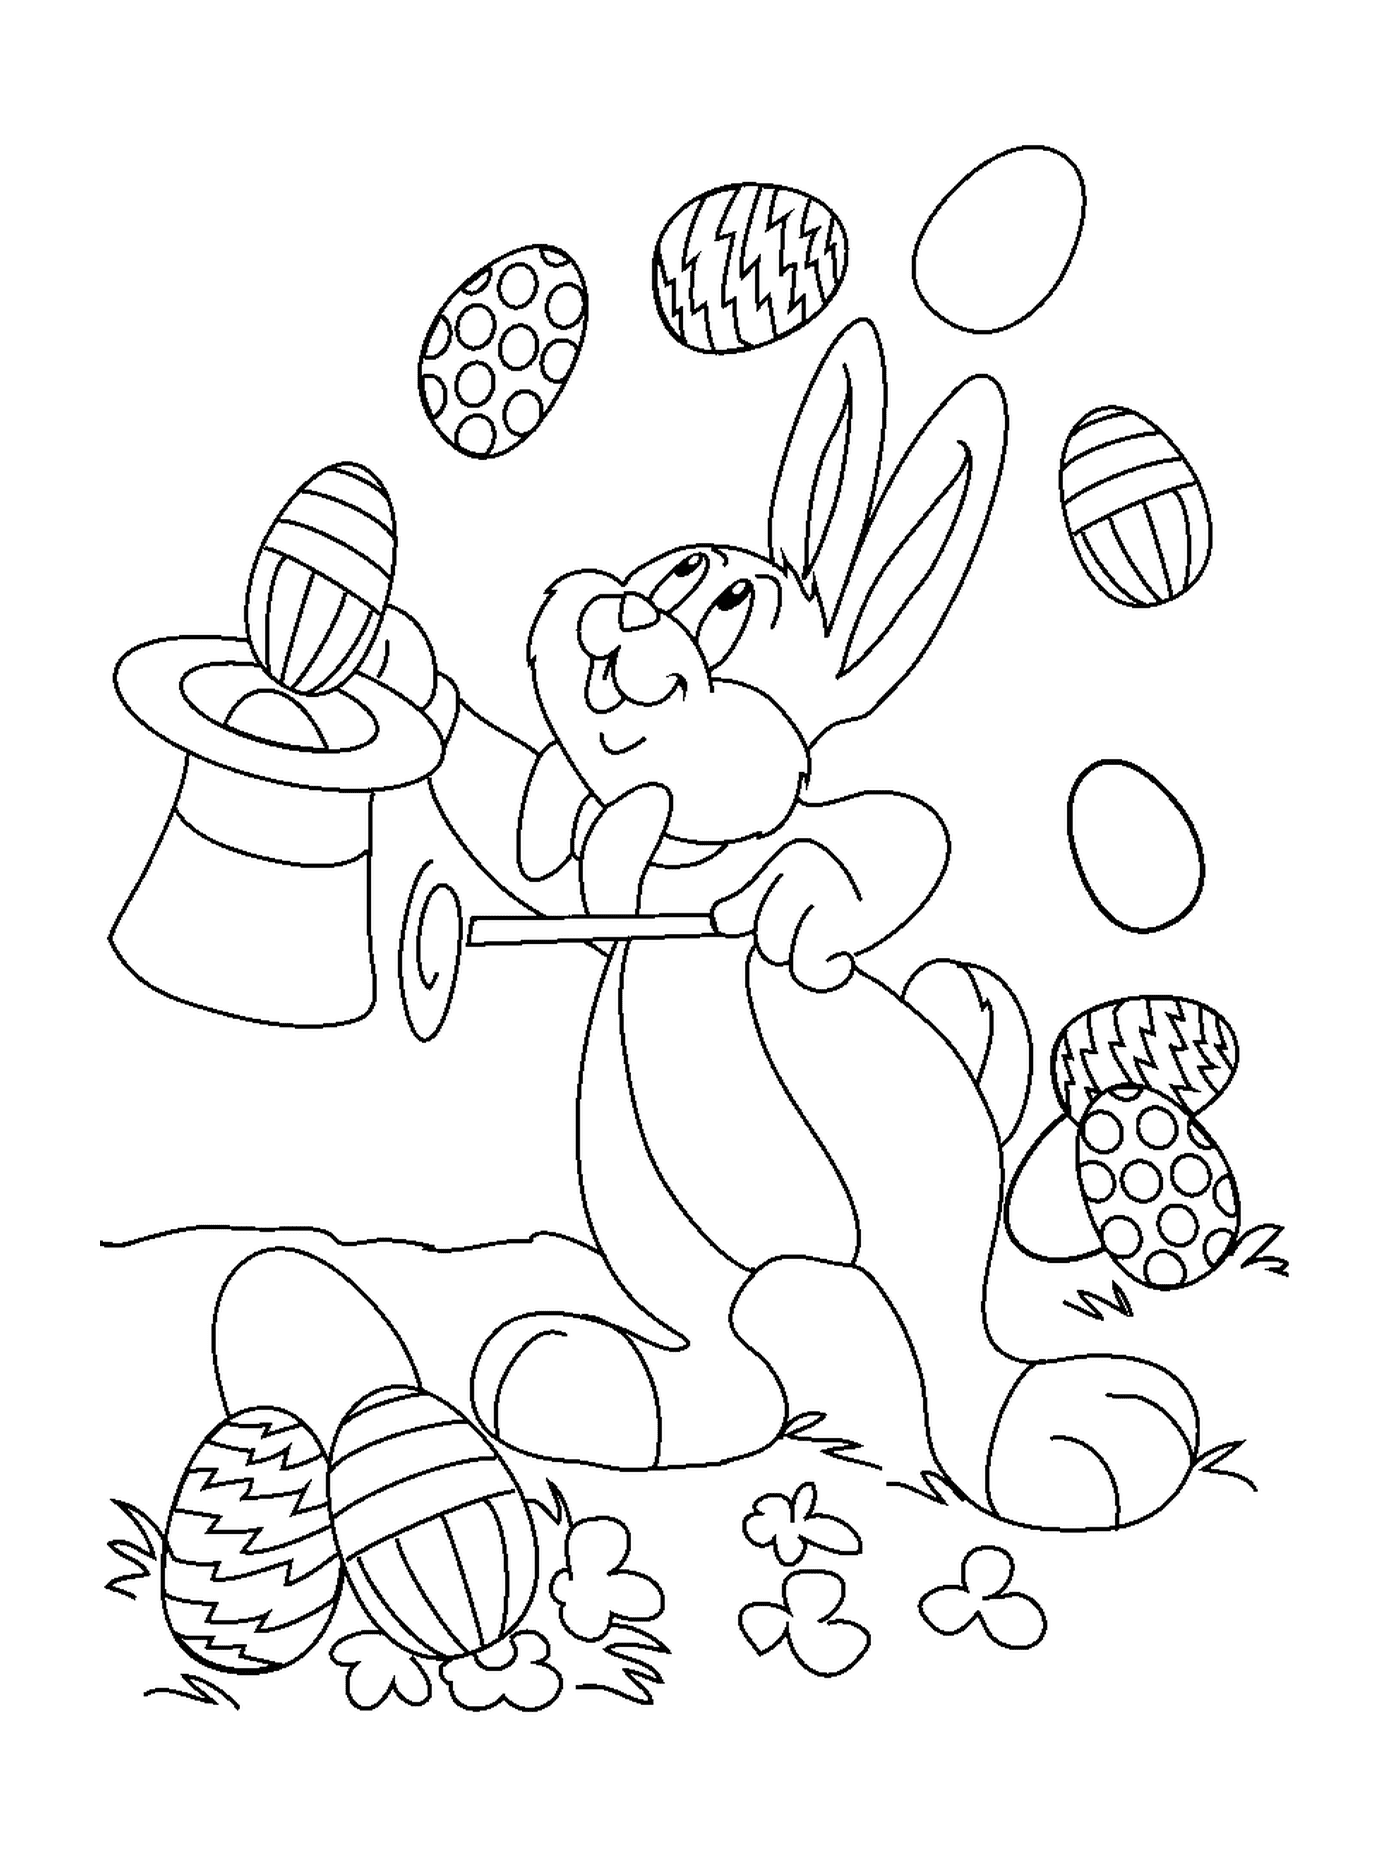  An Easter rabbit playing with eggs 